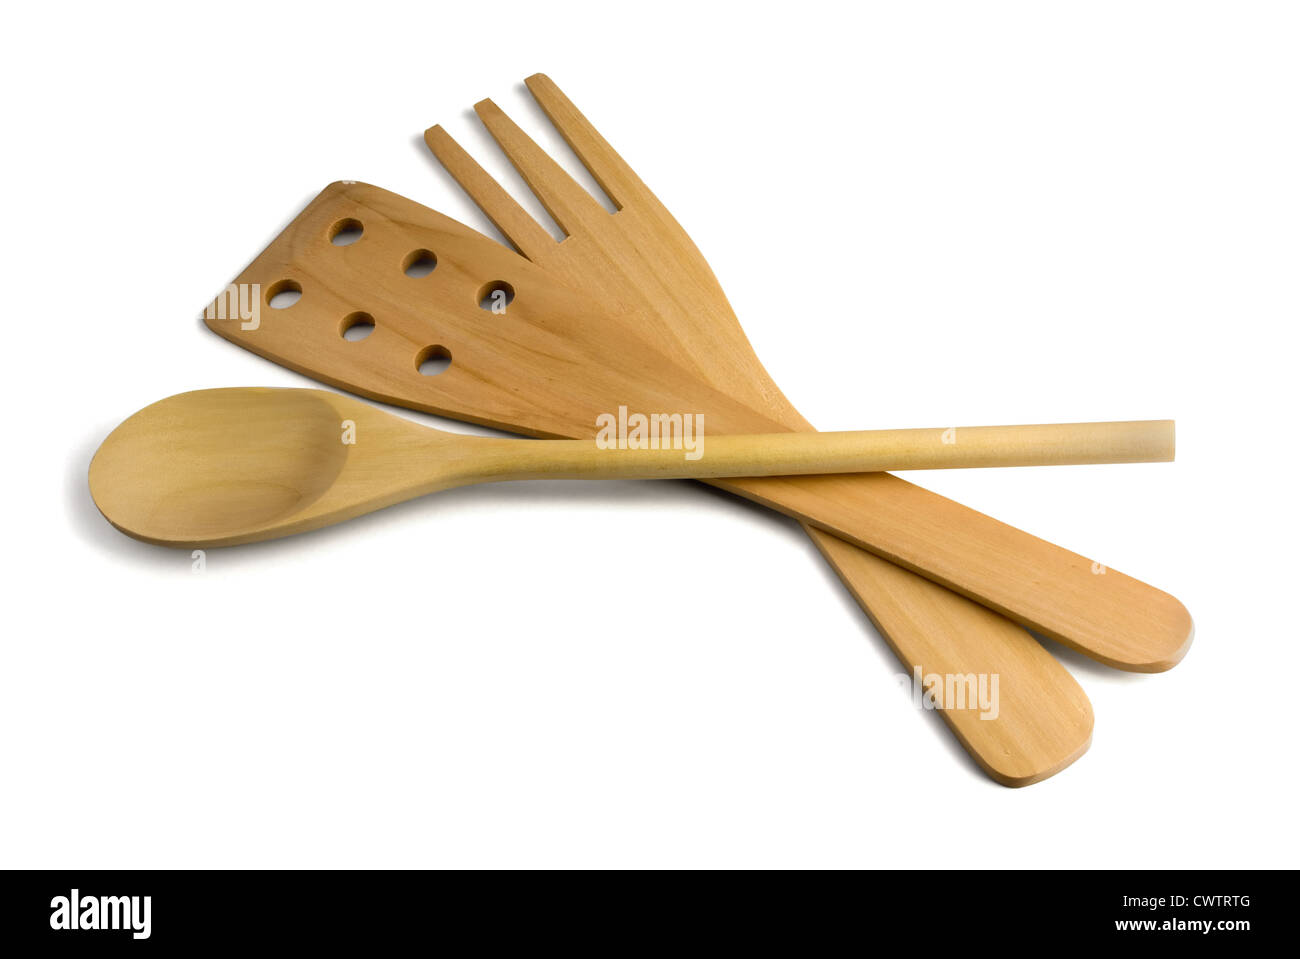 Set of wooden cooking utensils isolated on white Stock Photo